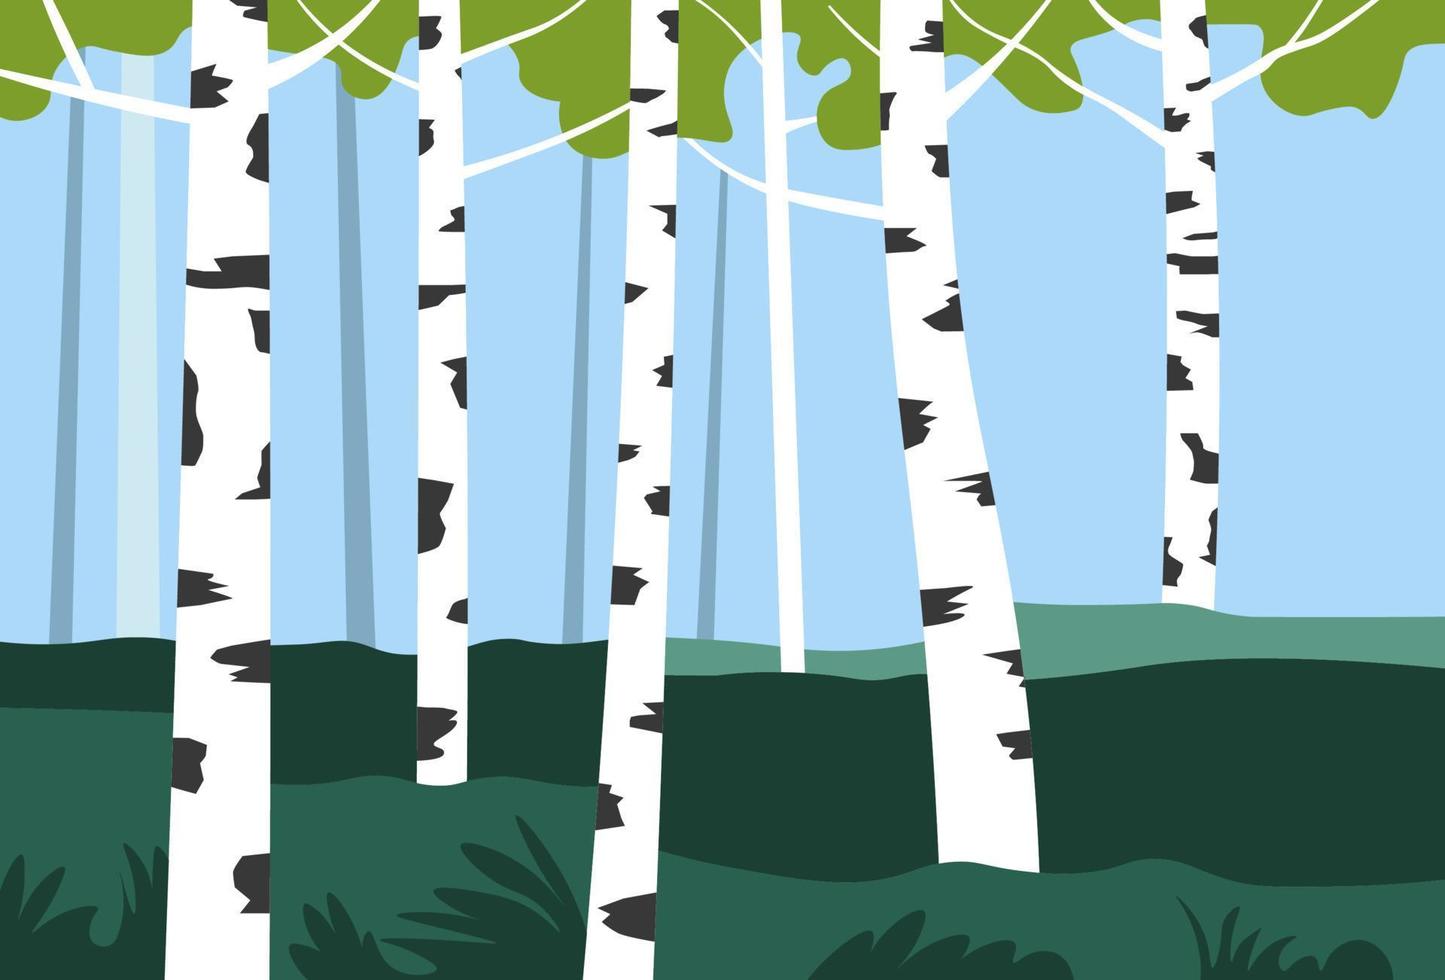 Birch trees in park or valley, nature landscape vector